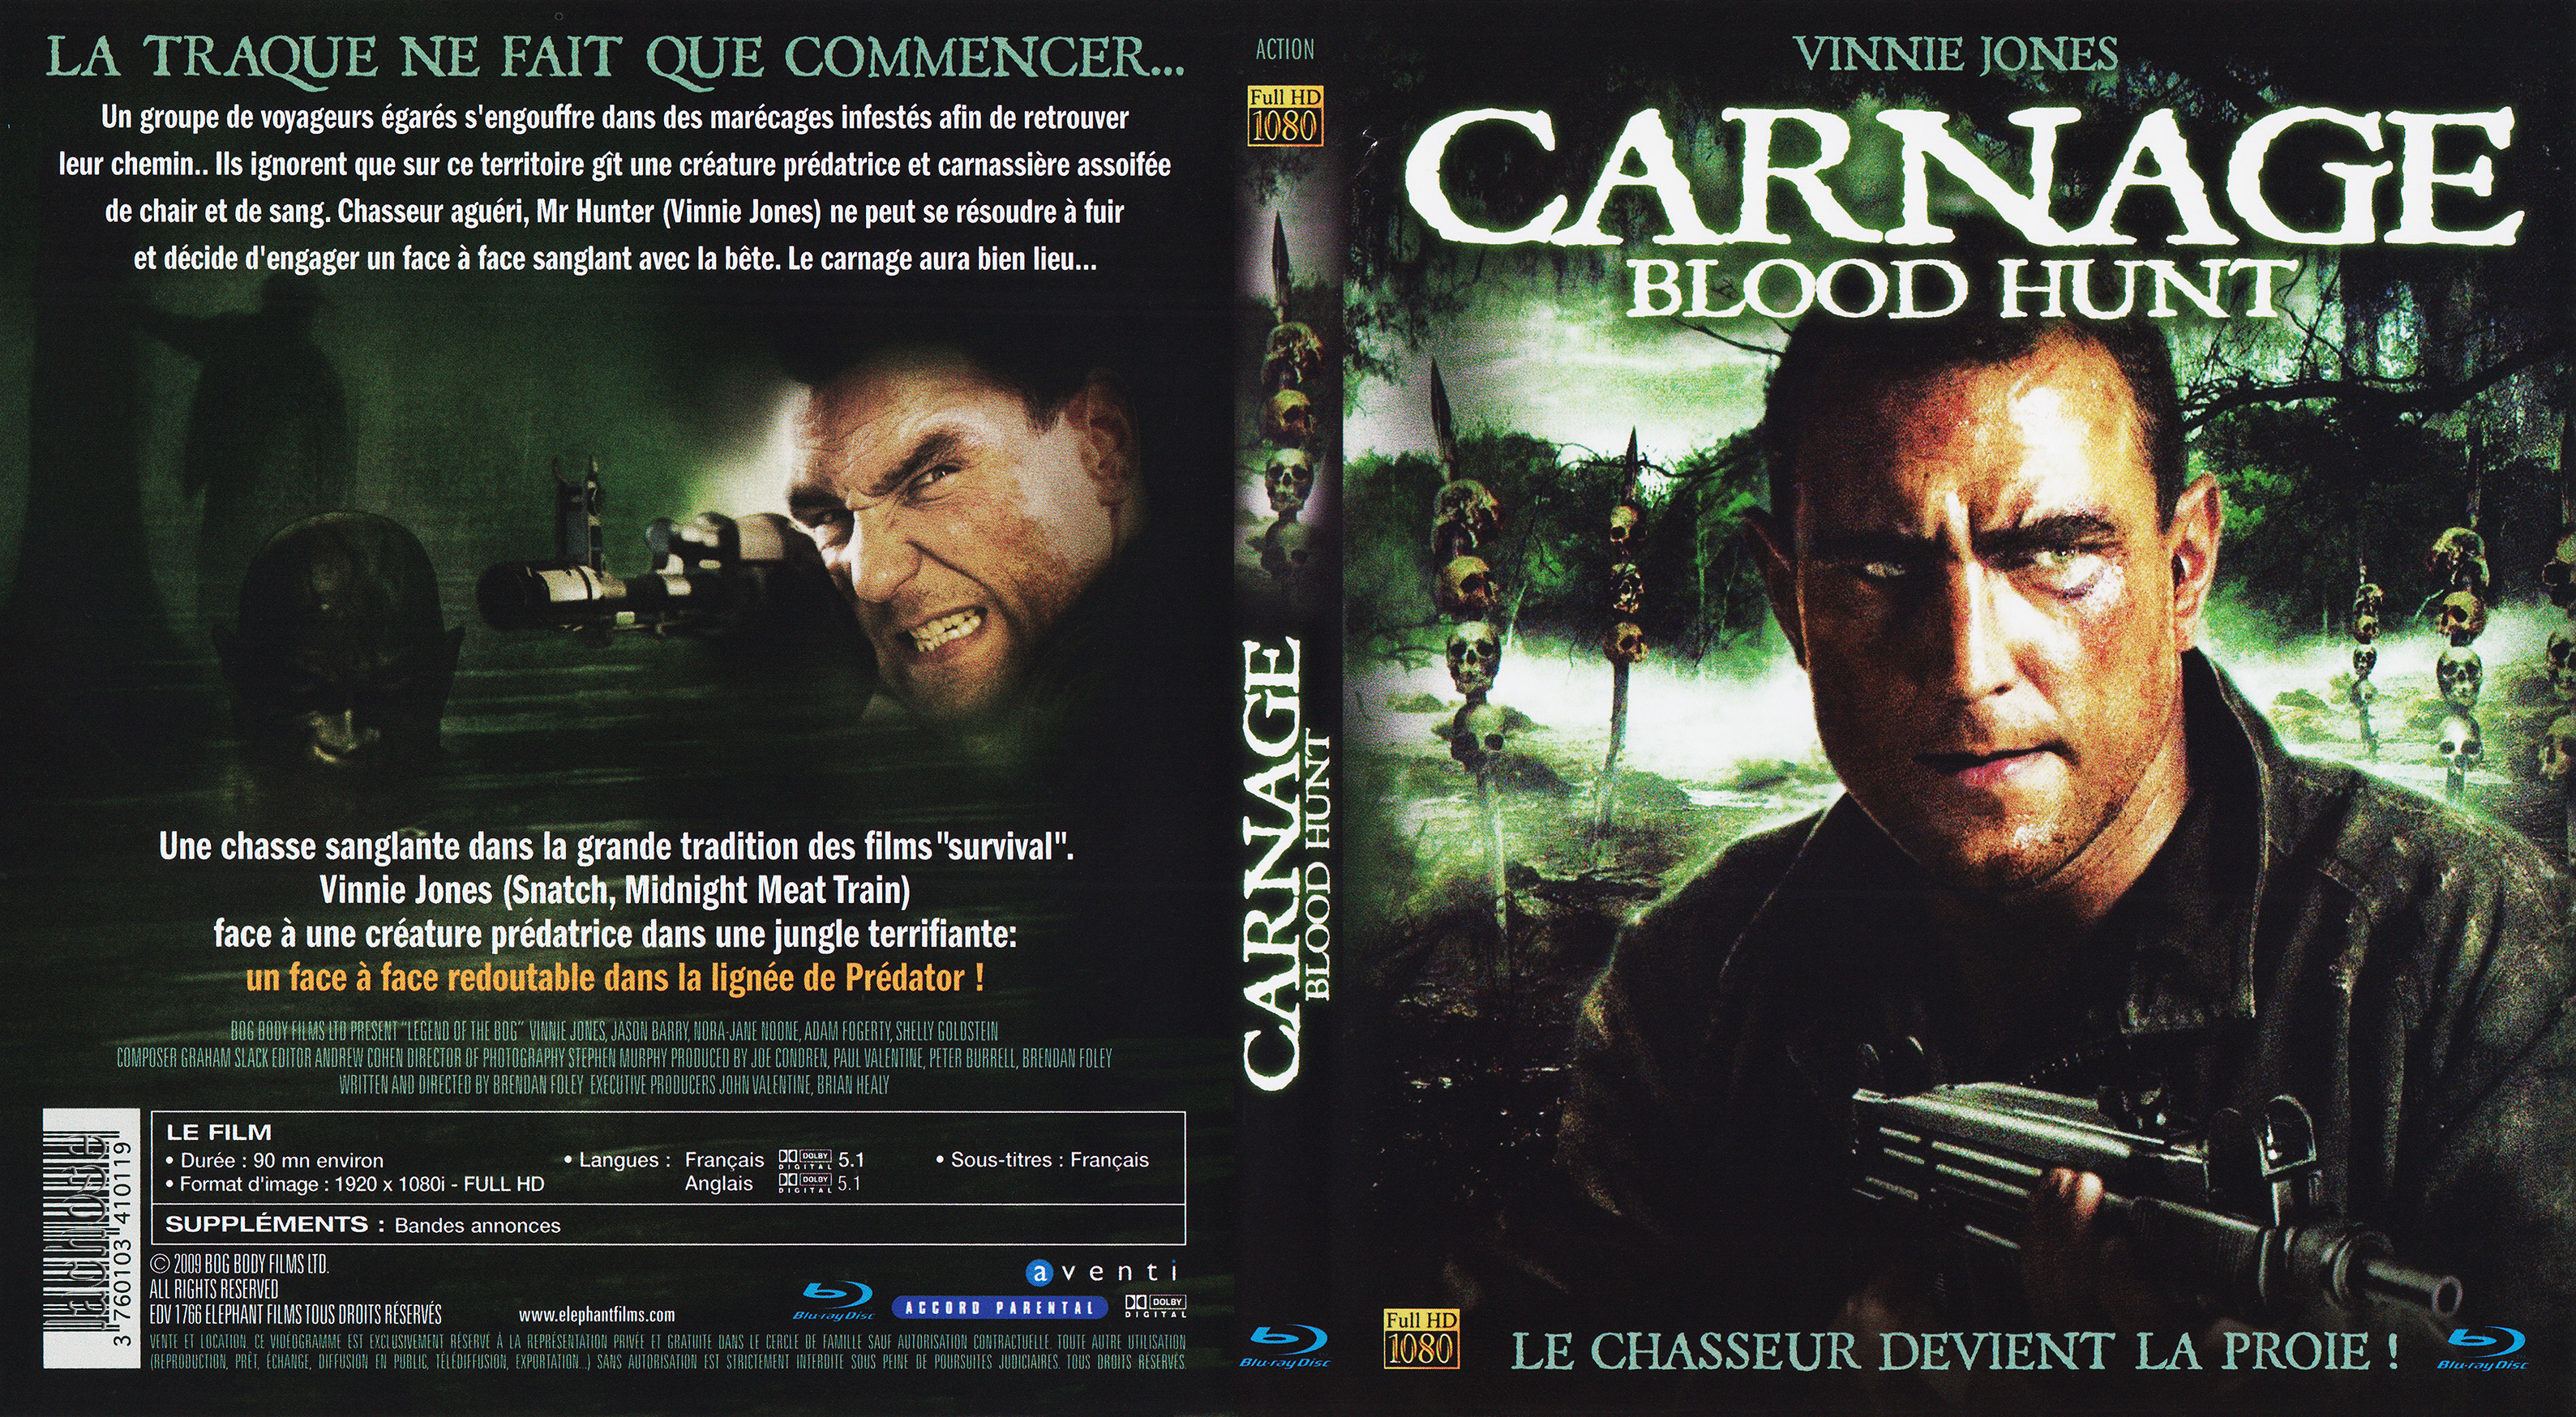 Jaquette DVD Carnage - blood hunt (BLU-RAY)